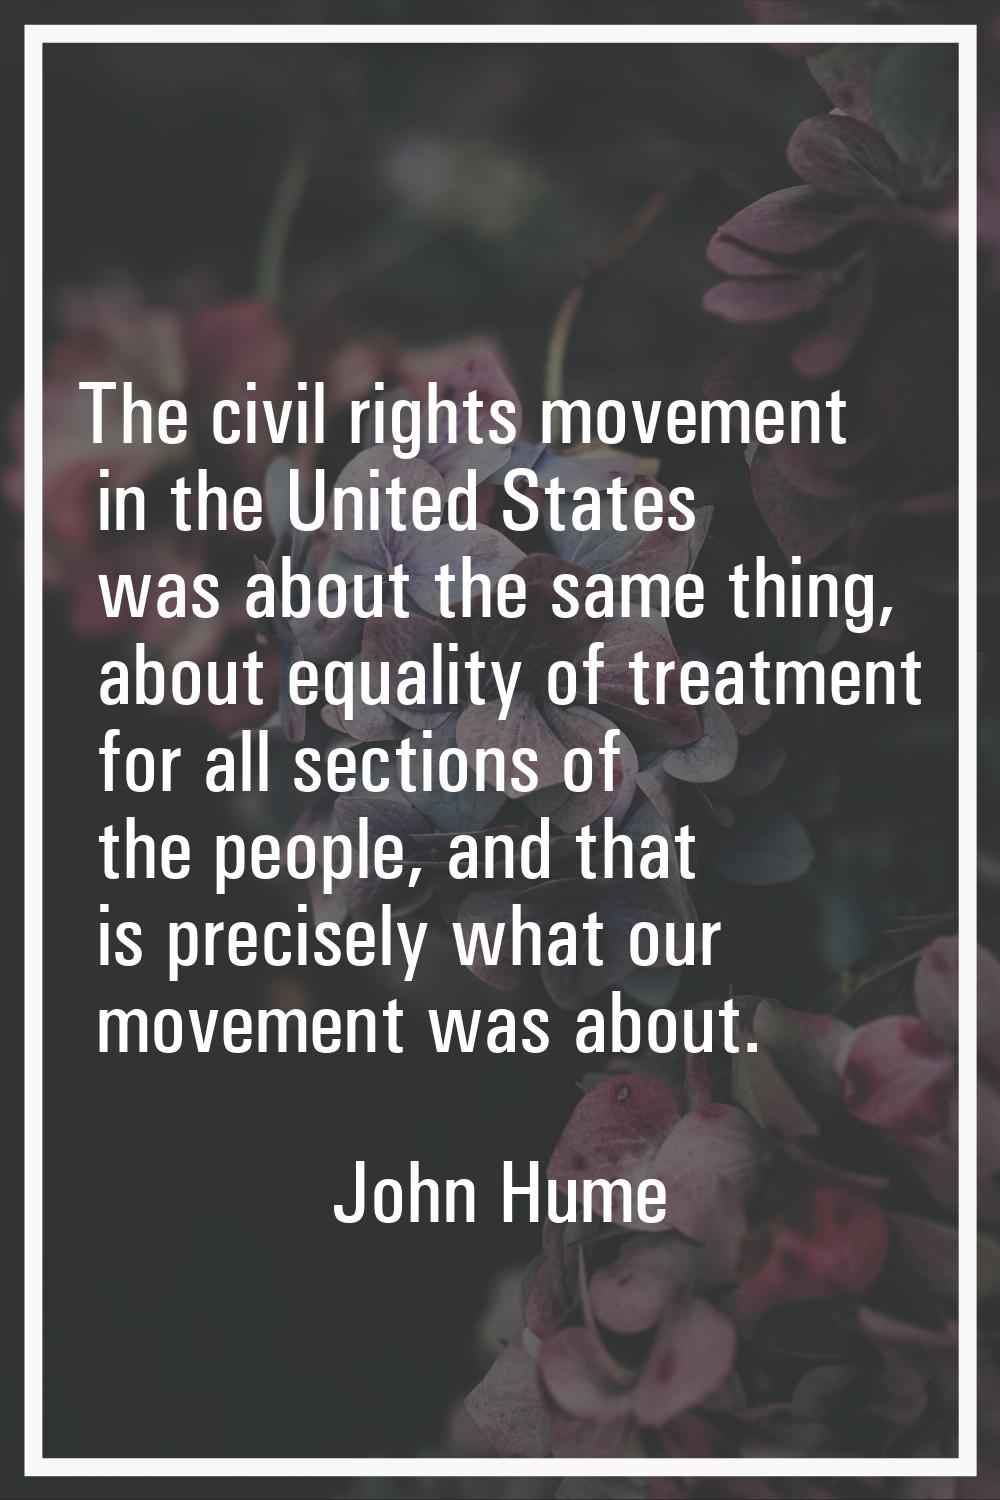 The civil rights movement in the United States was about the same thing, about equality of treatmen